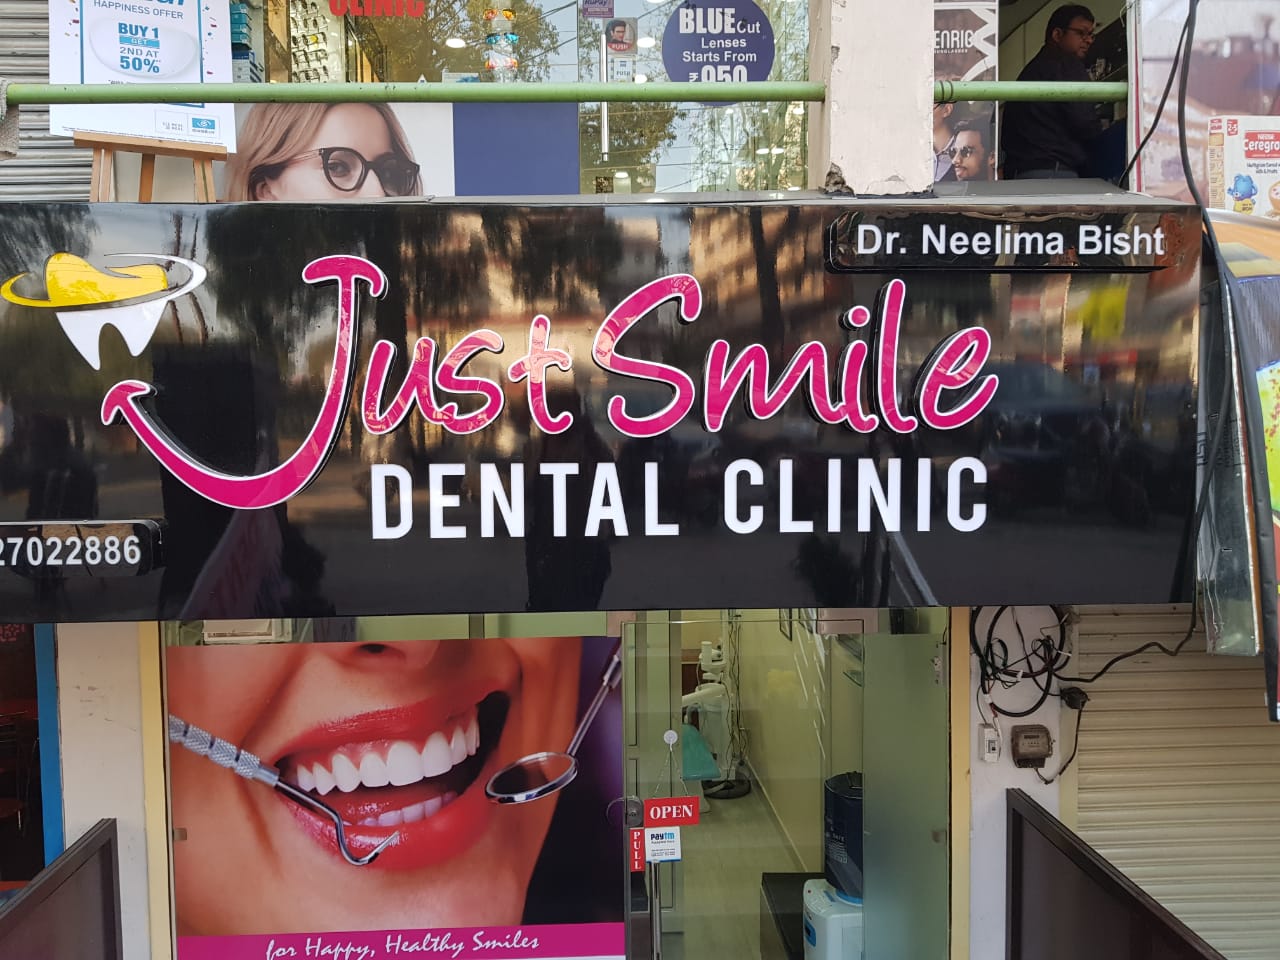 Just Smile dental clinic|Dentists|Medical Services